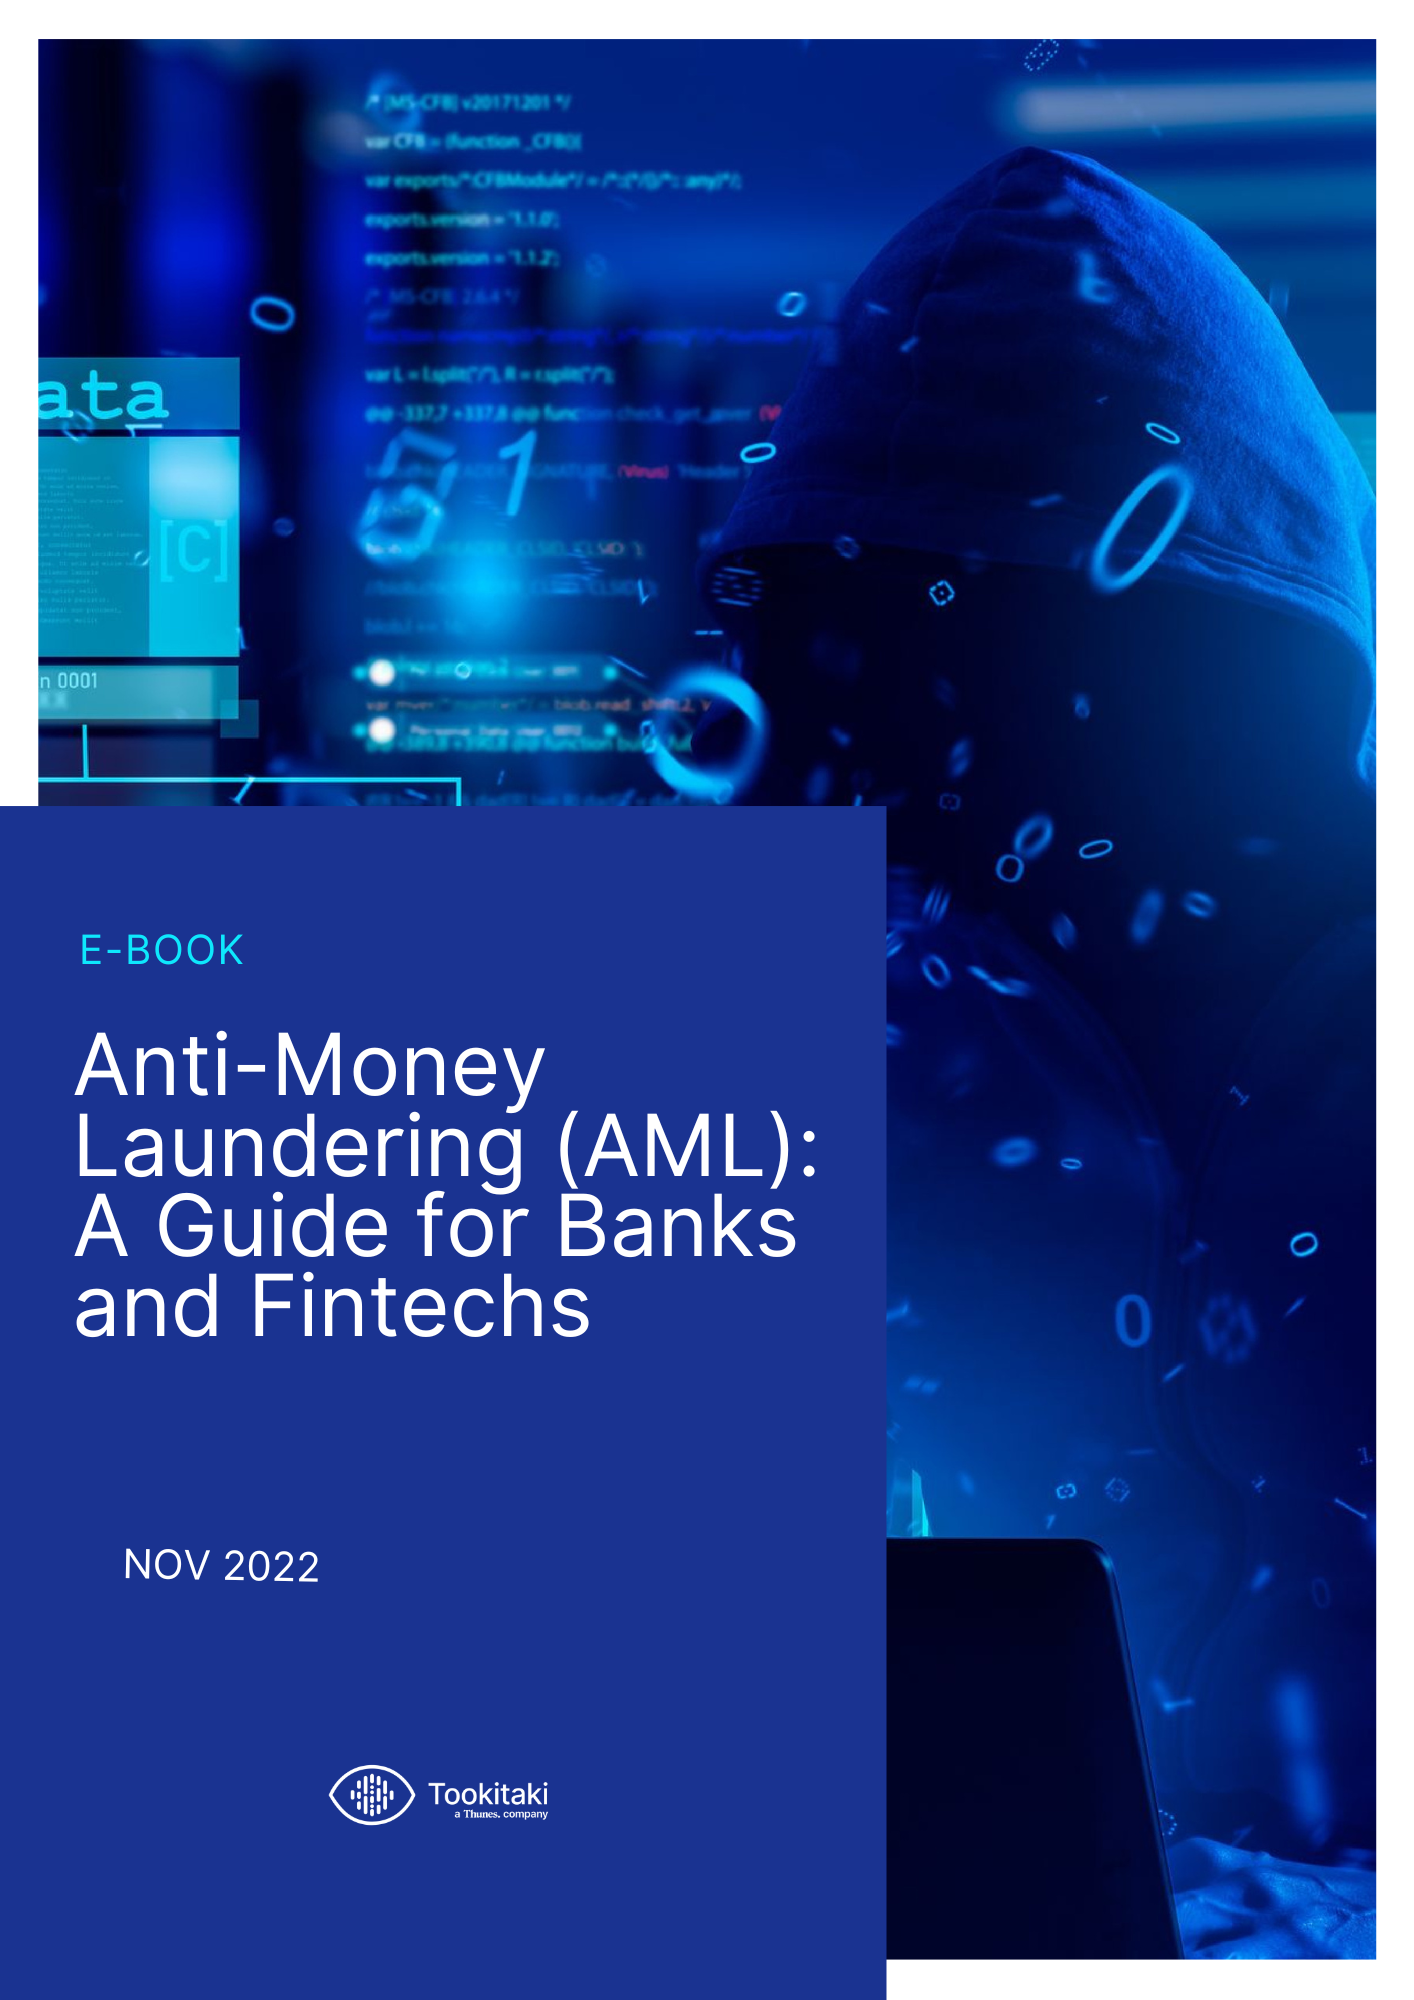 Ebook-guide for banks and fintechs